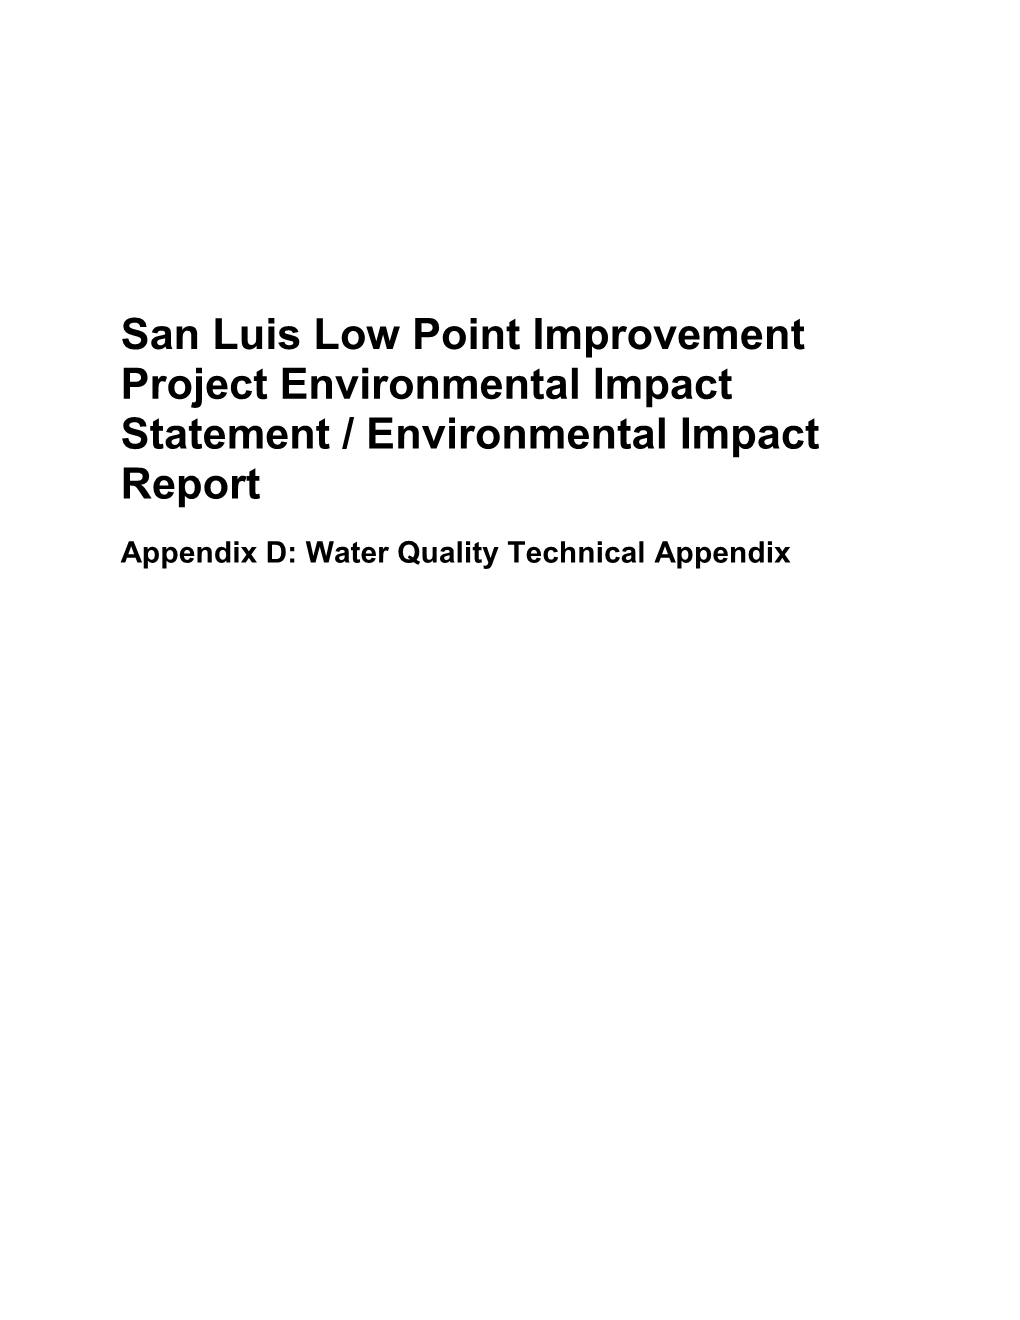 Water Quality Technical Appendix